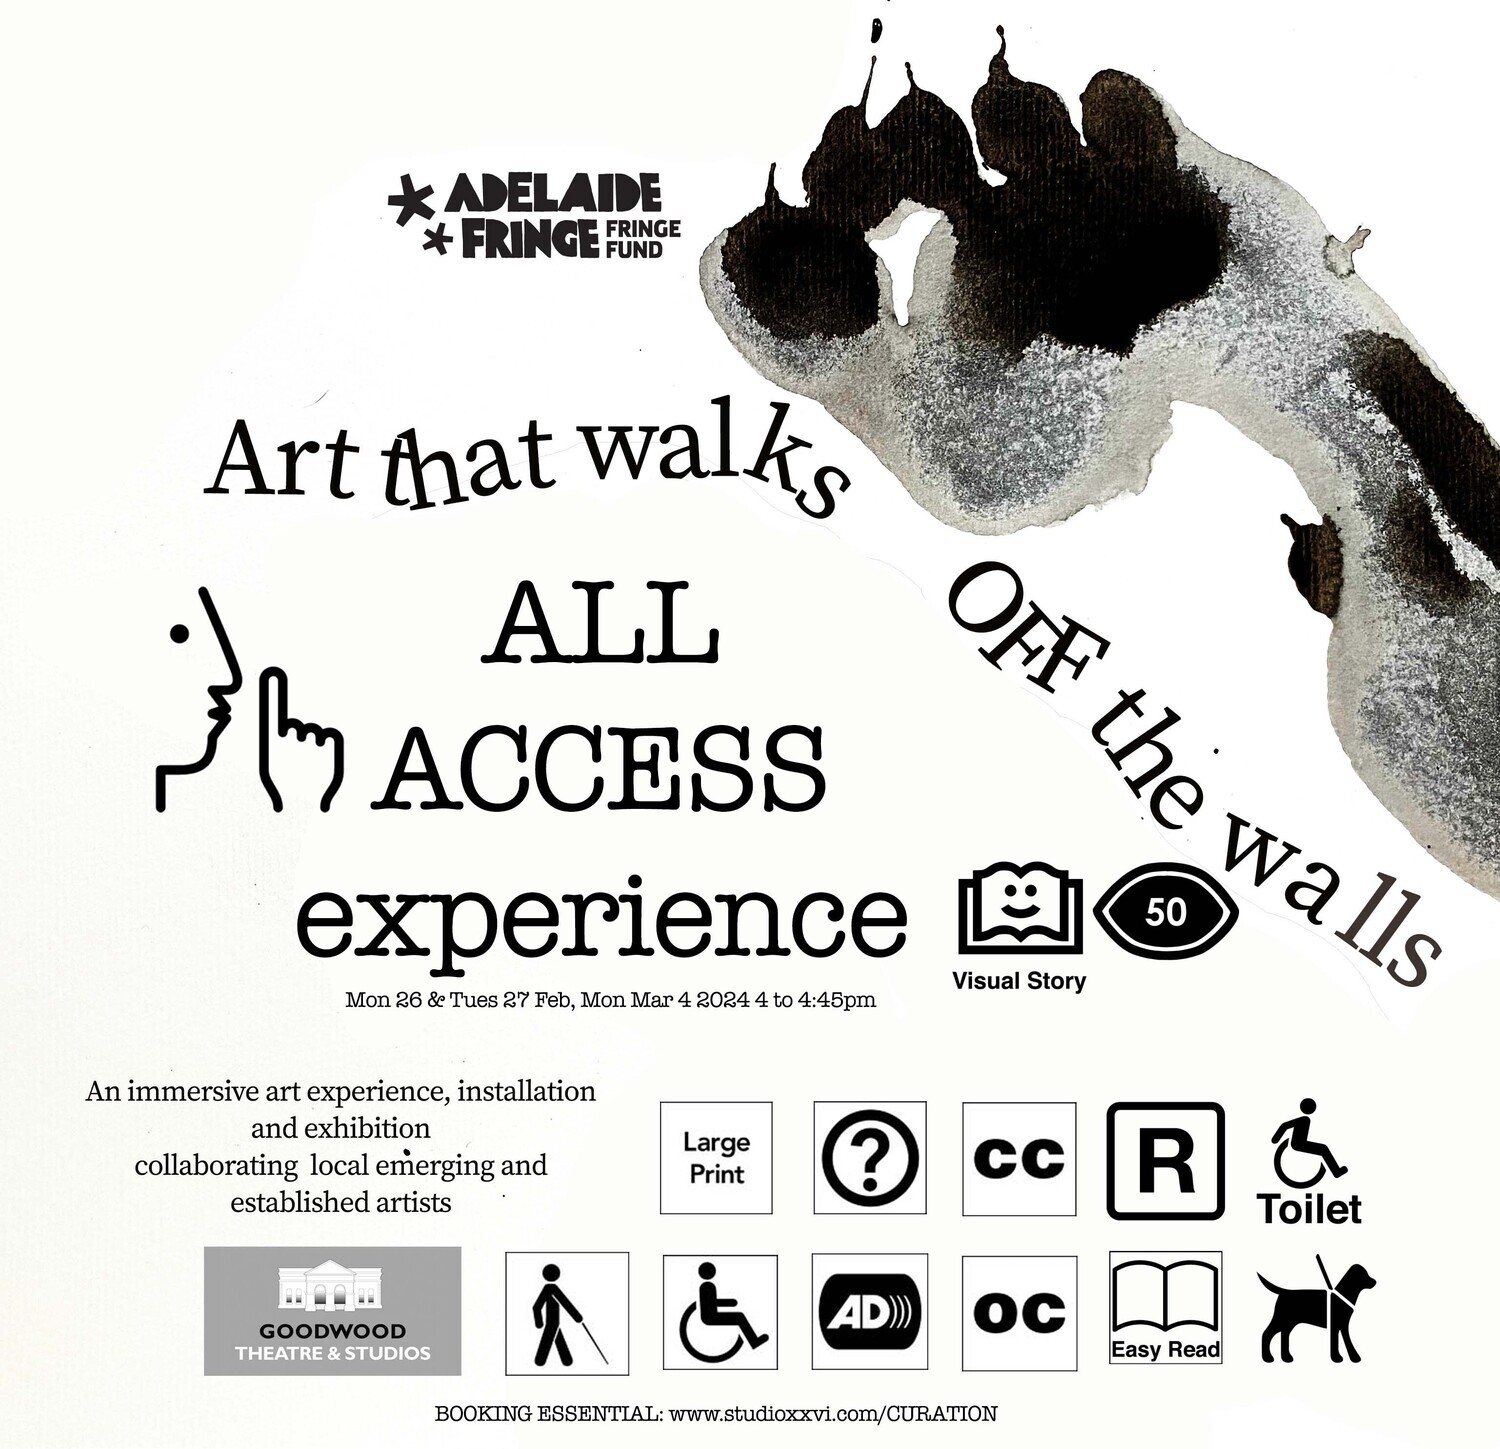 Art that walks OFF the walls ALL ACCESS EXPERIENCE